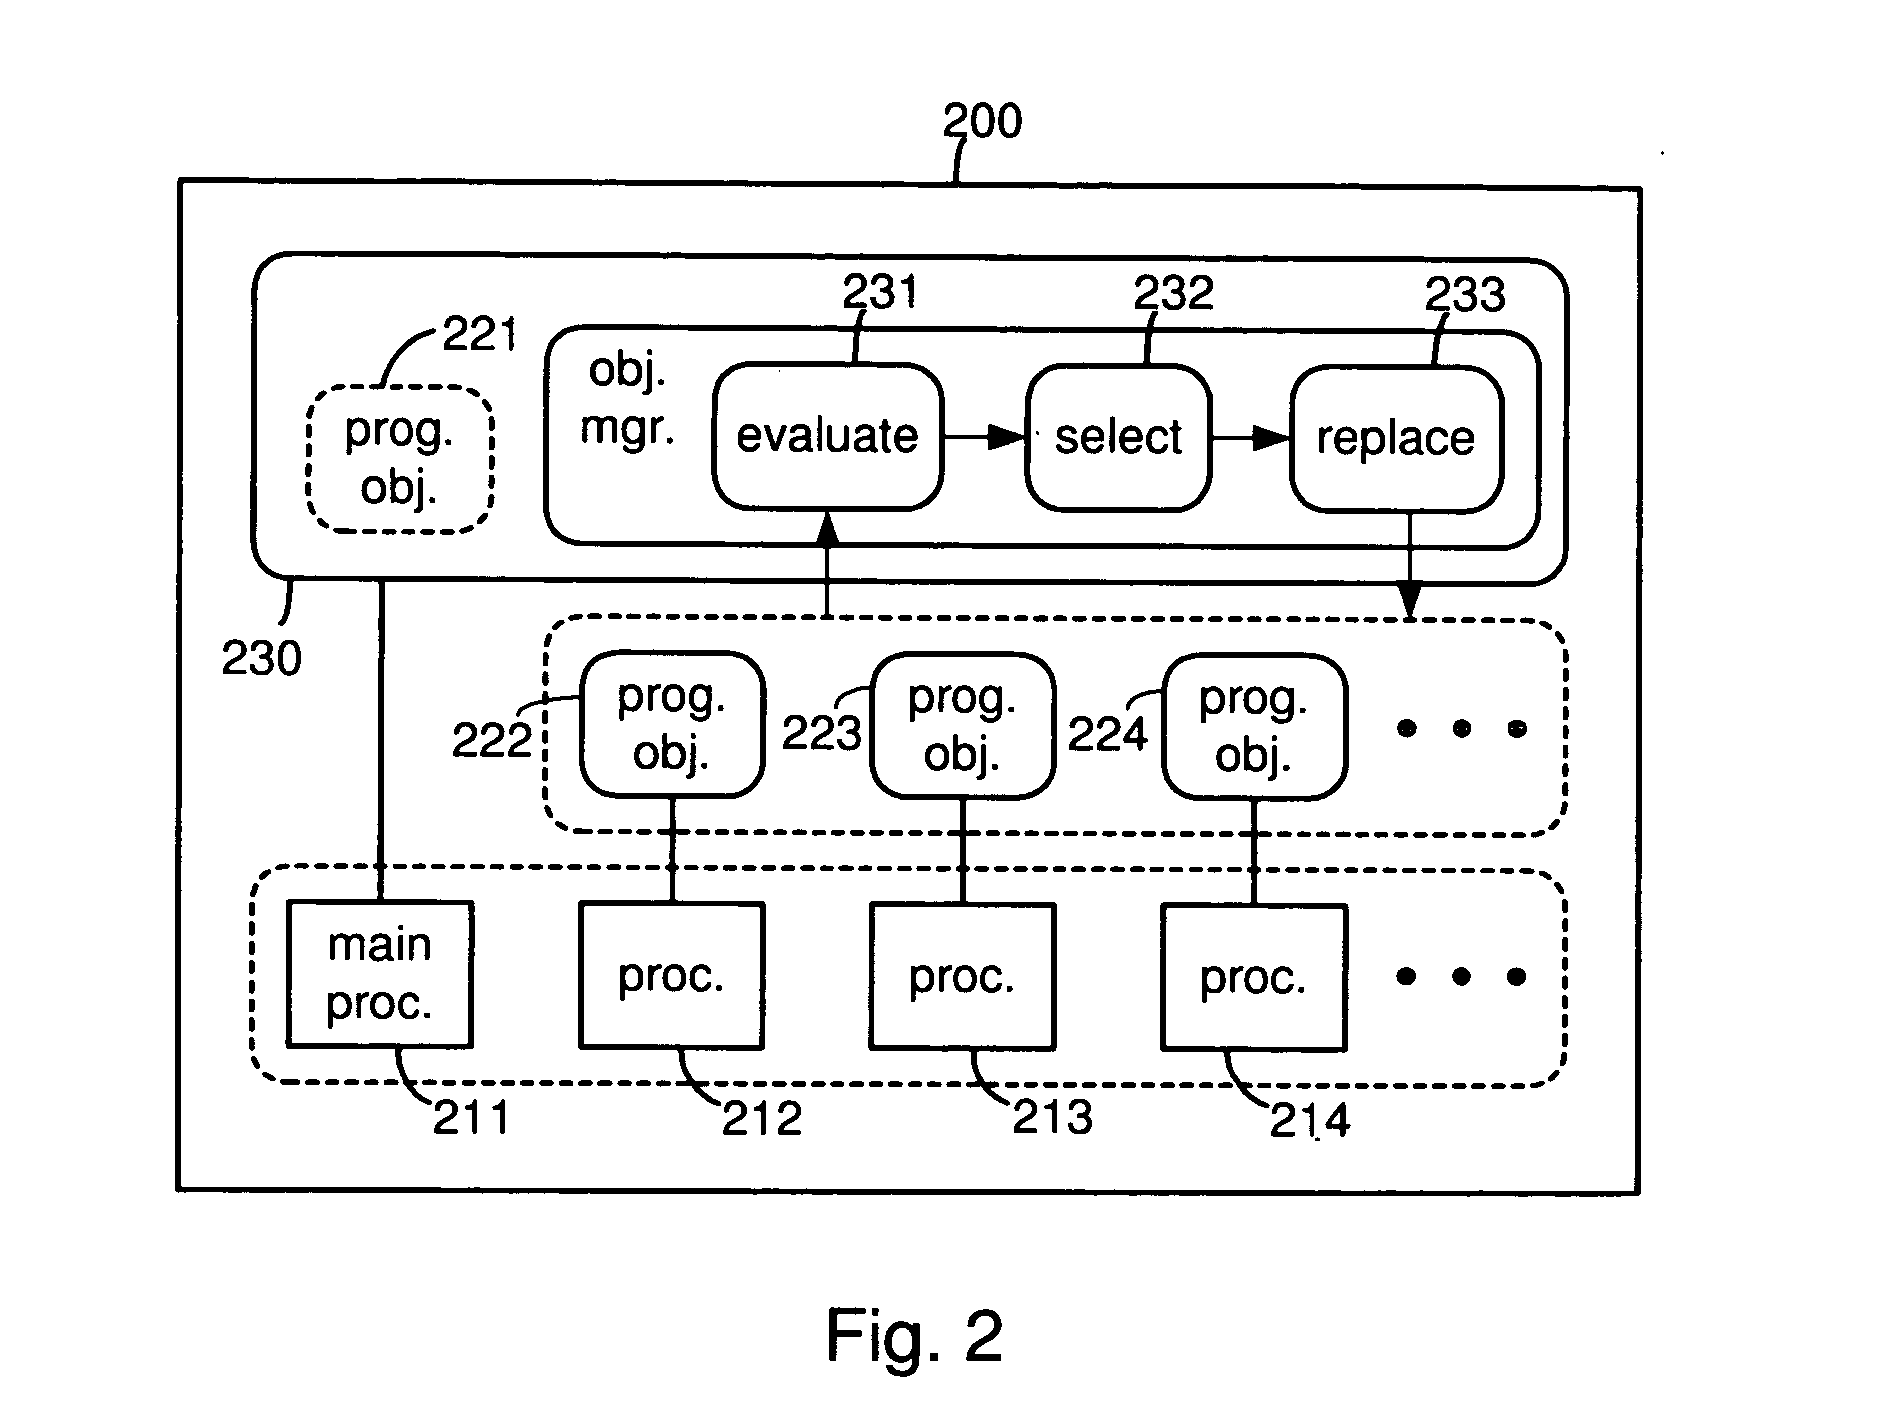 Self-organized parallel processing system